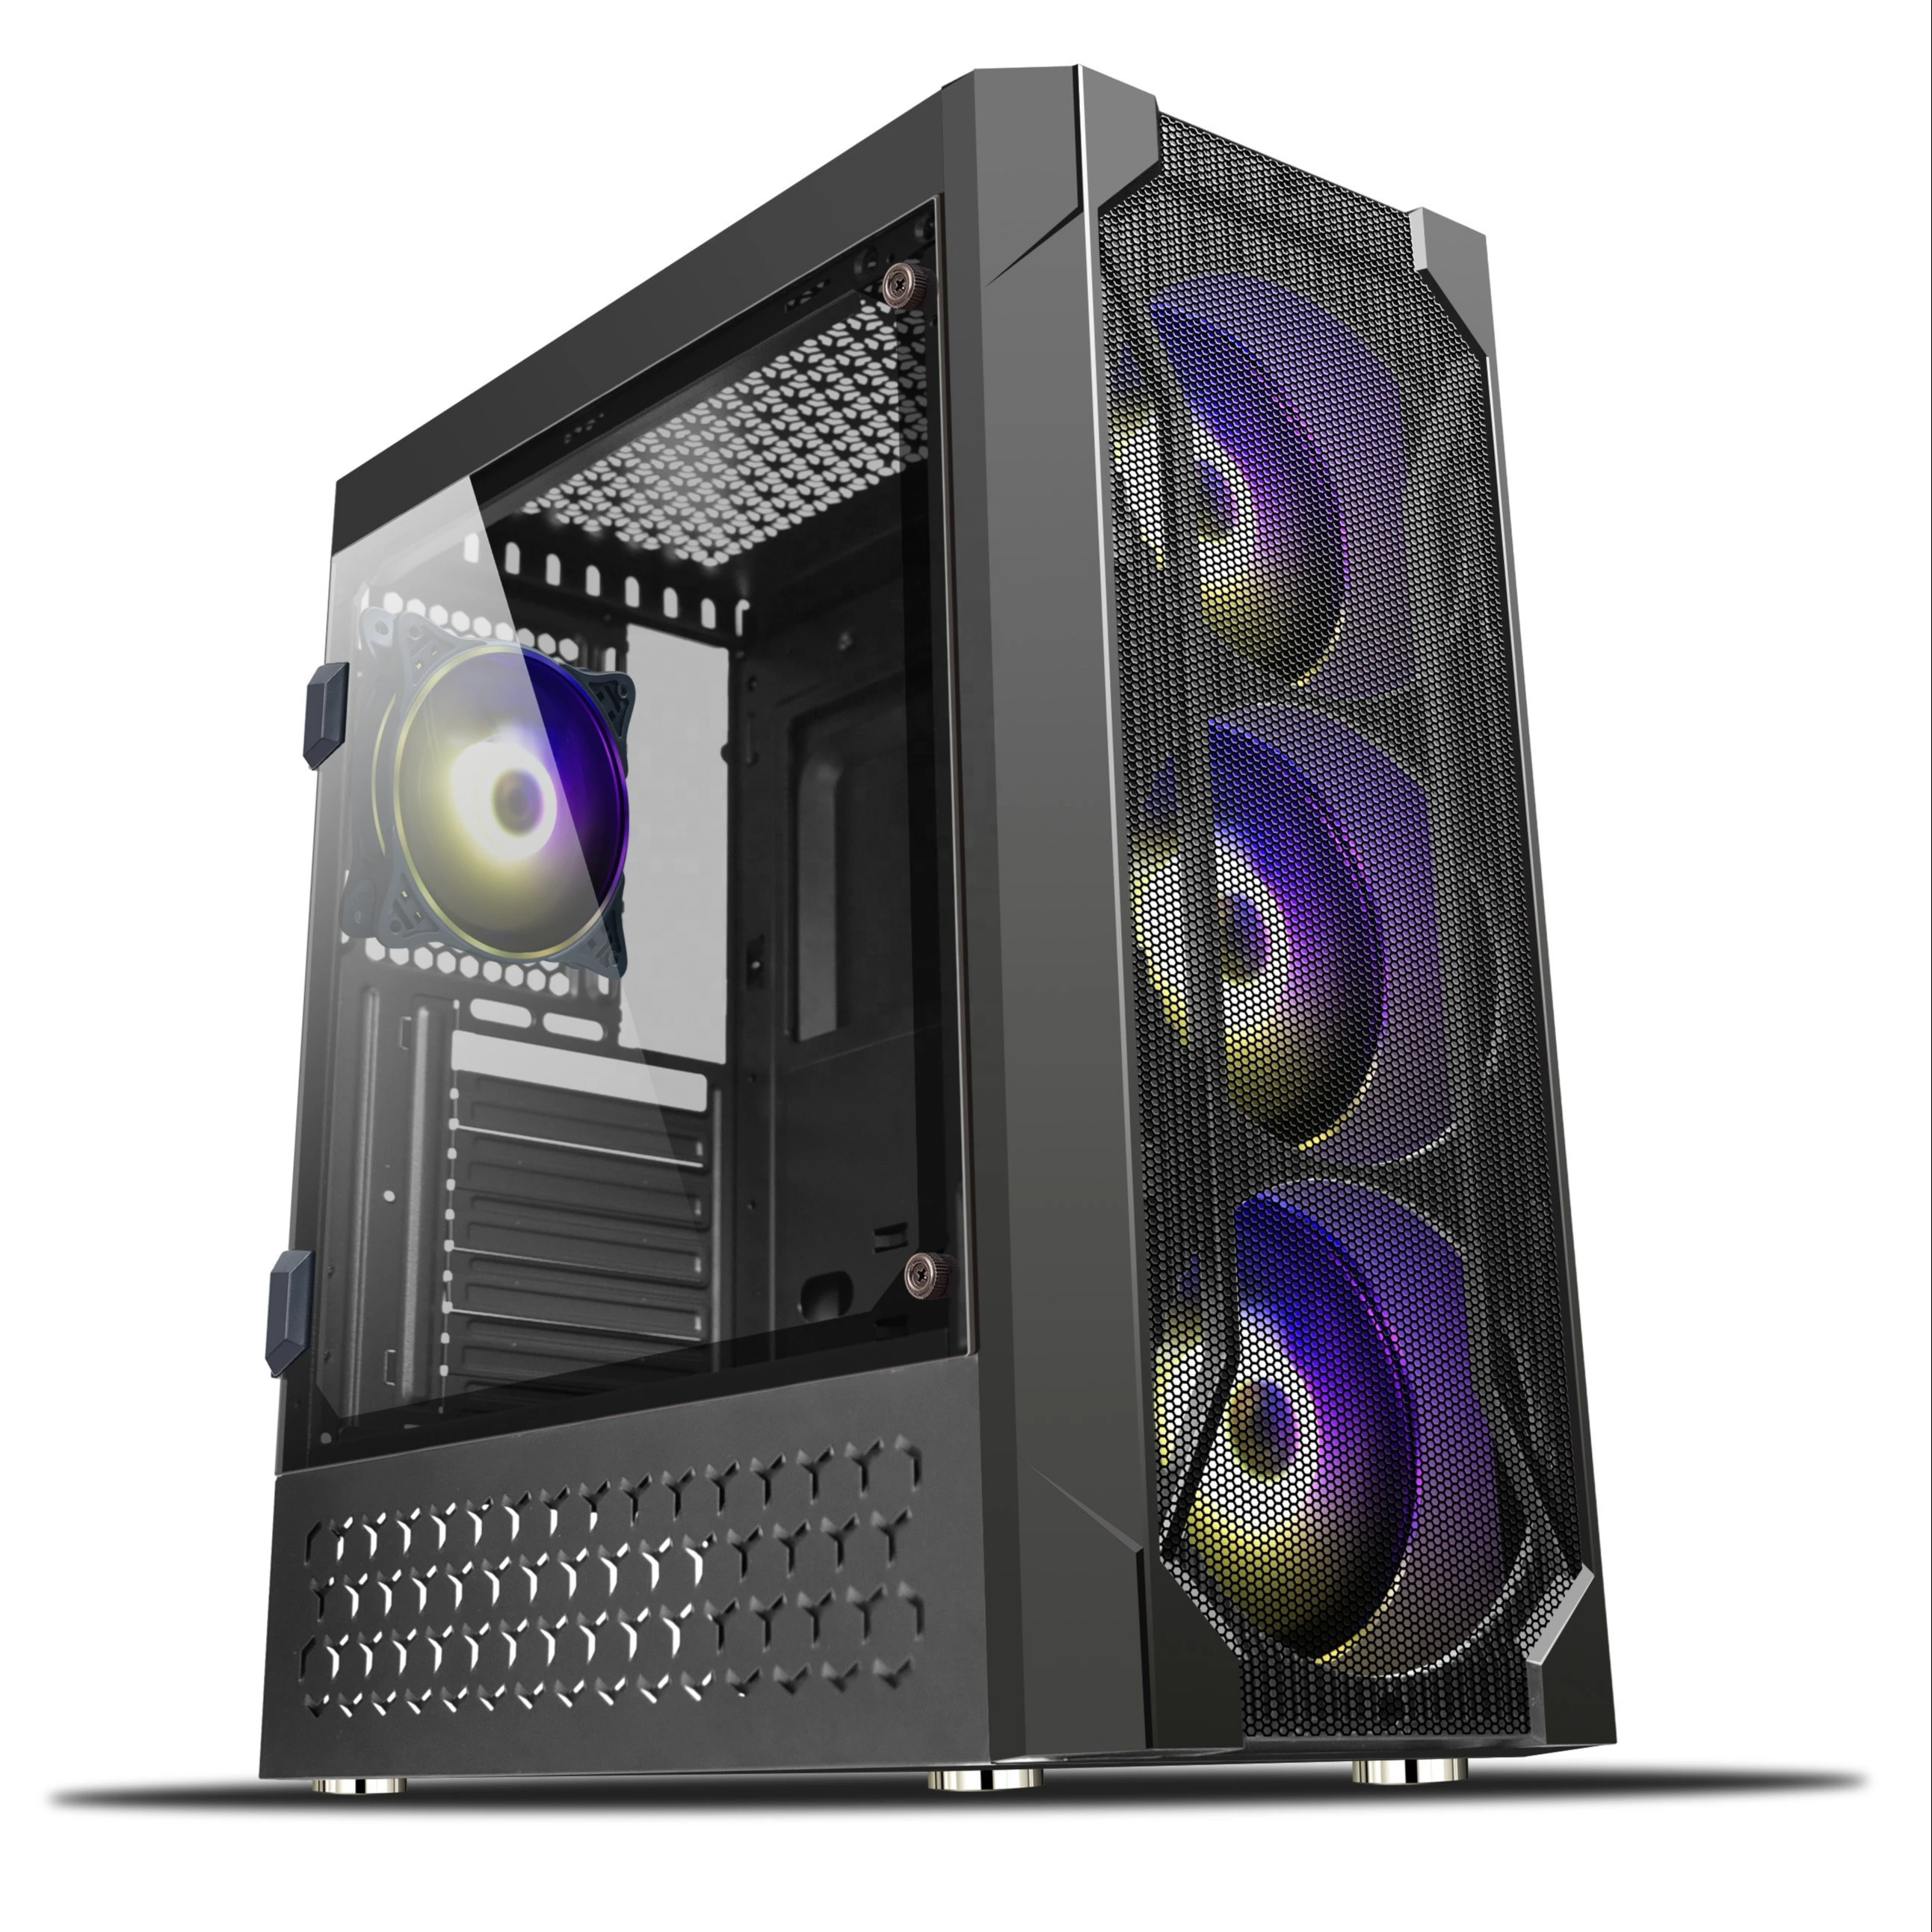 L06New Arrival Tempered Glass Computer Case with Metal Mesh Front Panel /Full Tower ATX PC Cabinet for Gaming